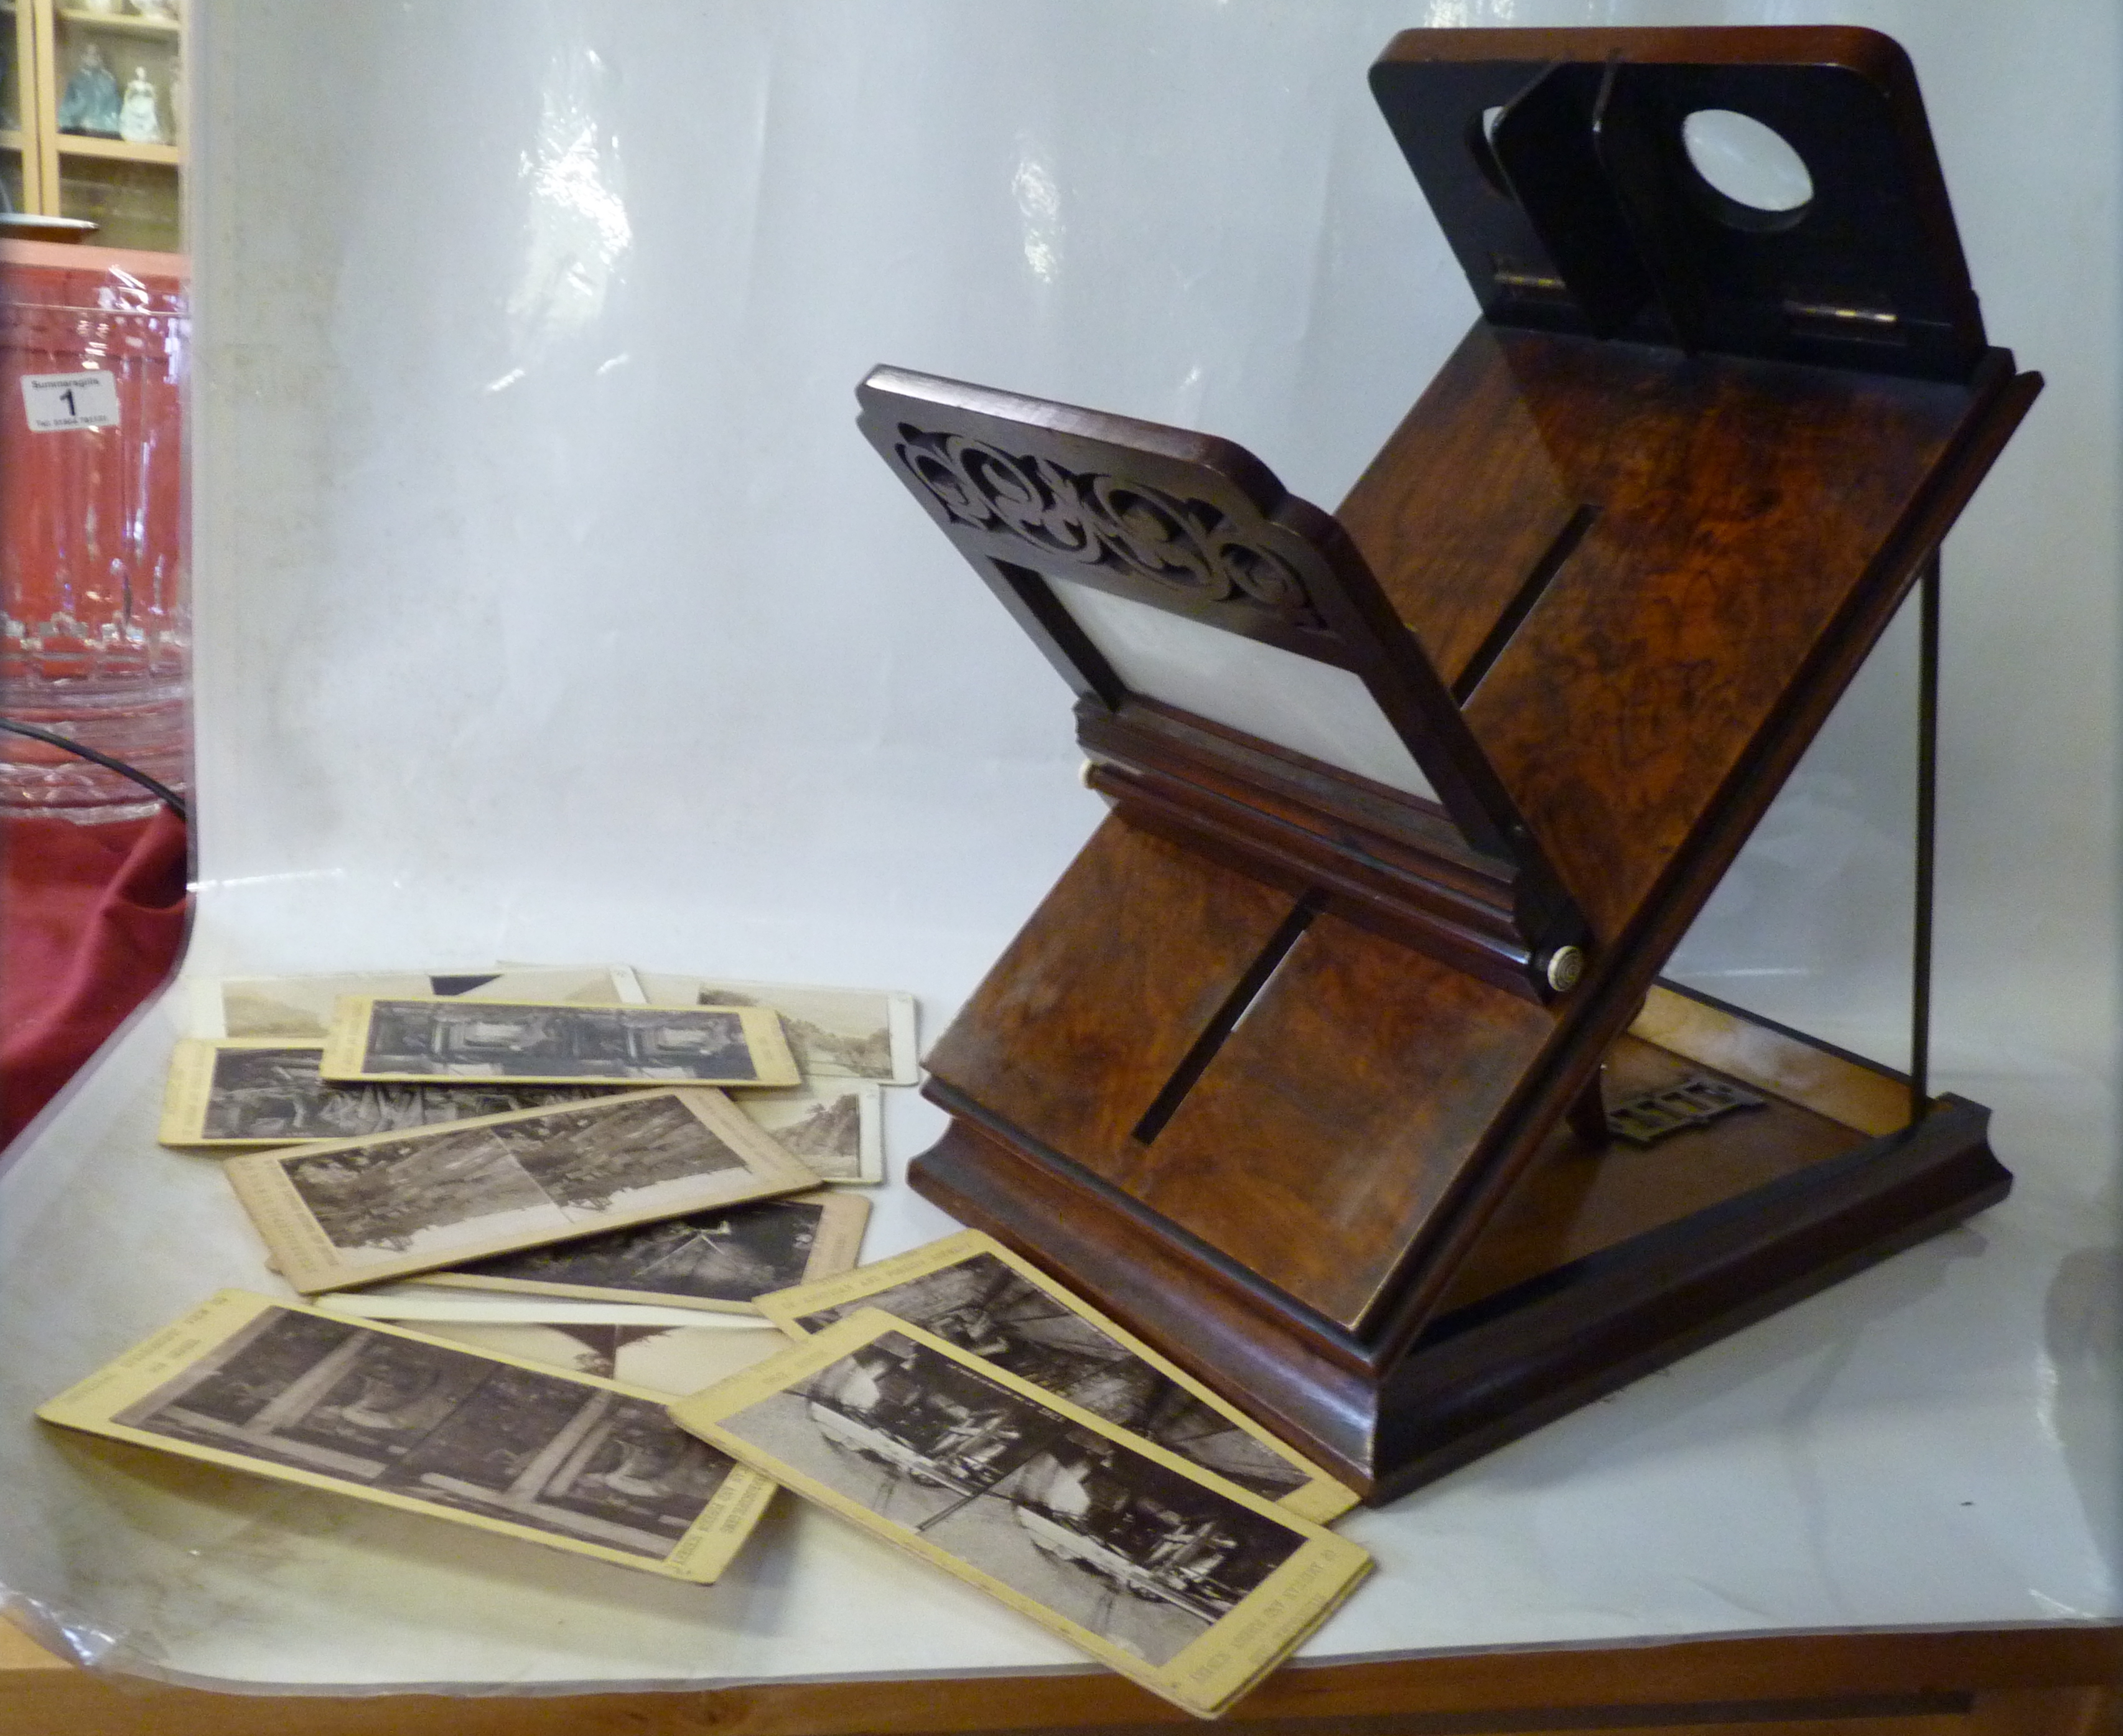 Walnut stereoscopic viewer and slides